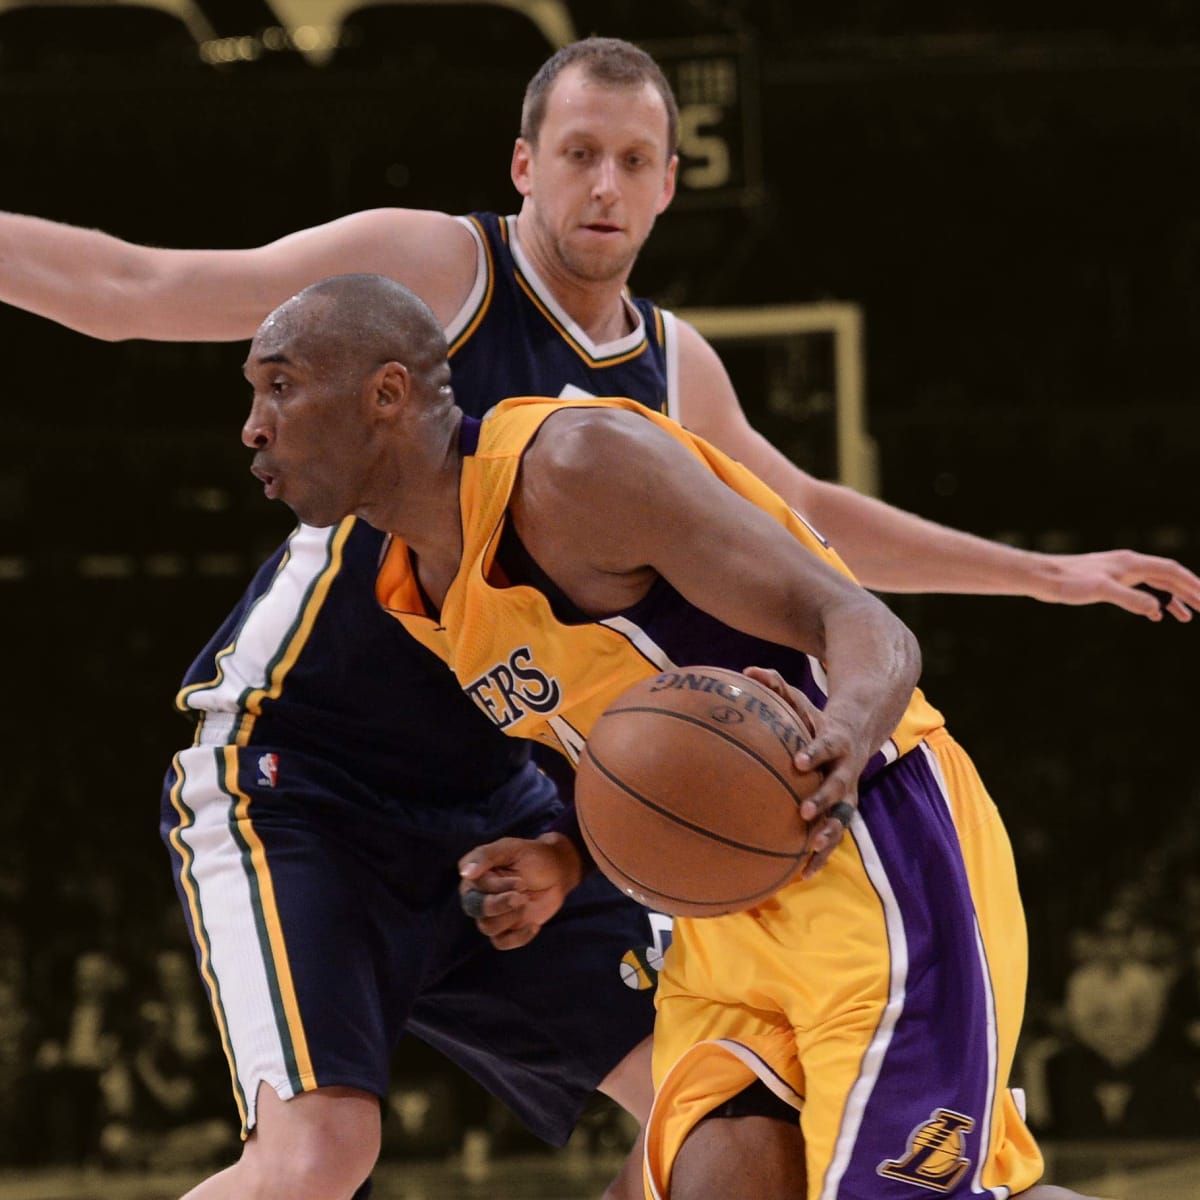 Why don't you get new shoes? -- Joe Ingles on why he keeps